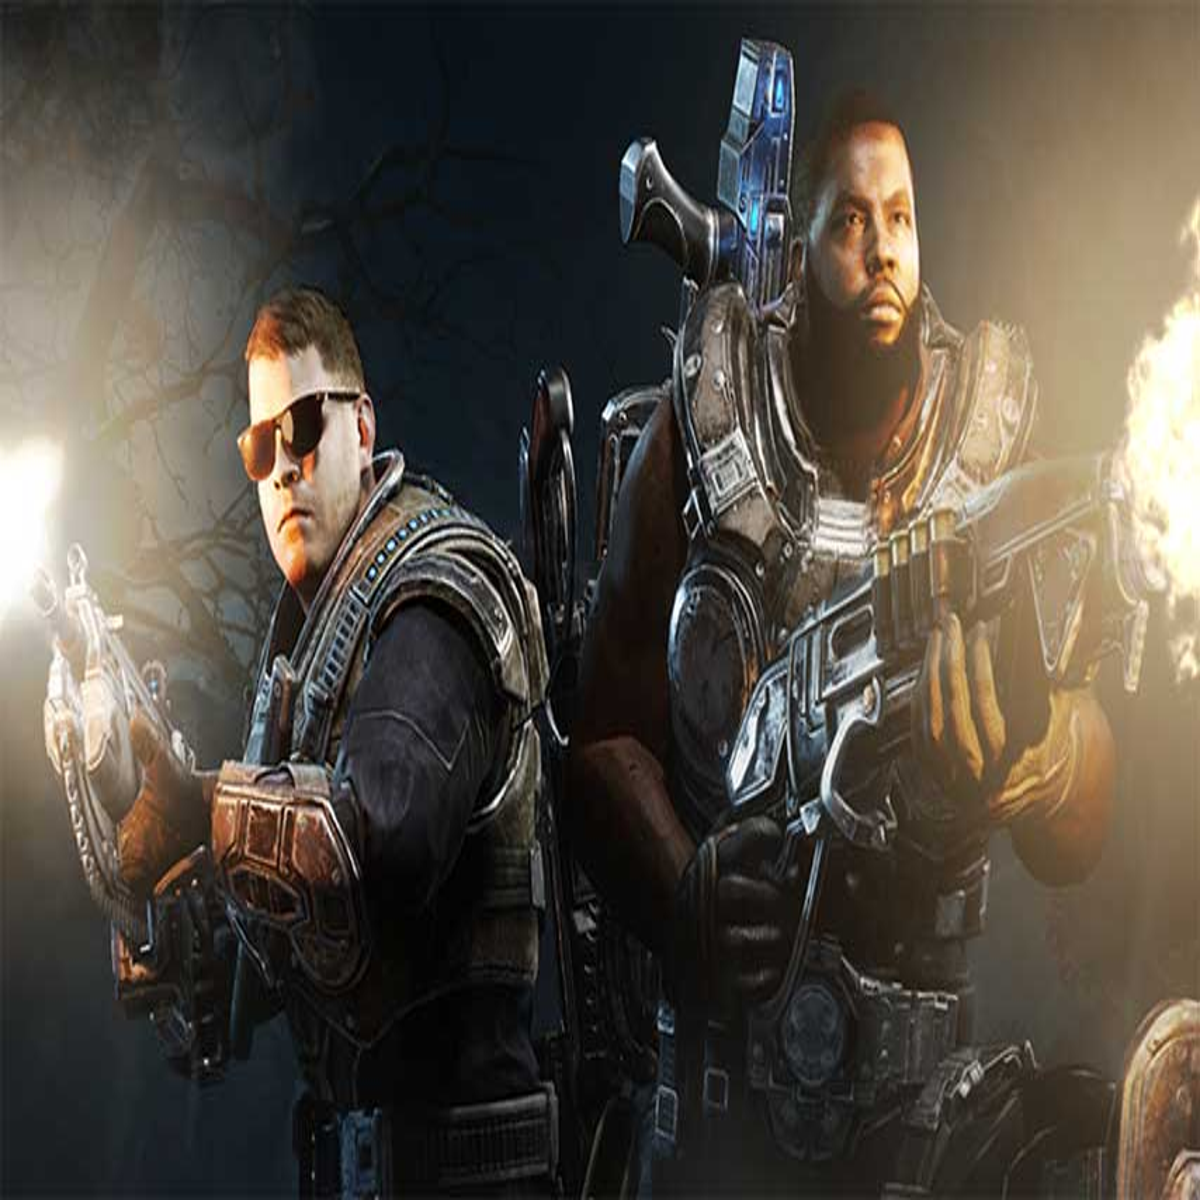 Gears of War 4 adds hip-hoppers Killer Mike and EL-P as DLC characters